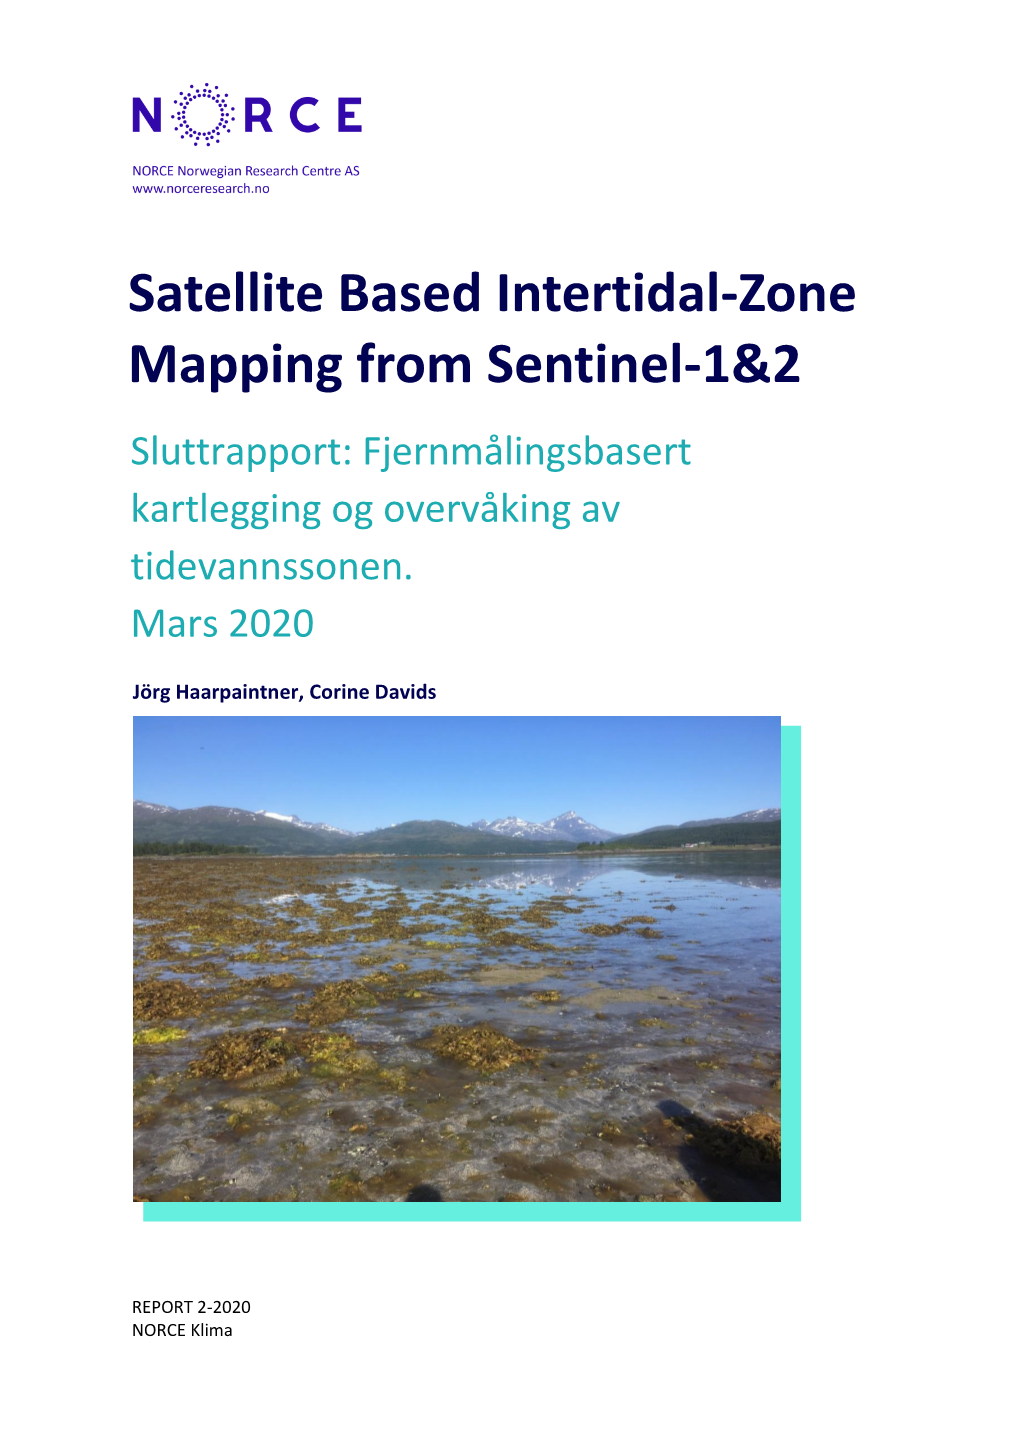 Satellite Based Intertidal-Zone Mapping from Sentinel-1&2